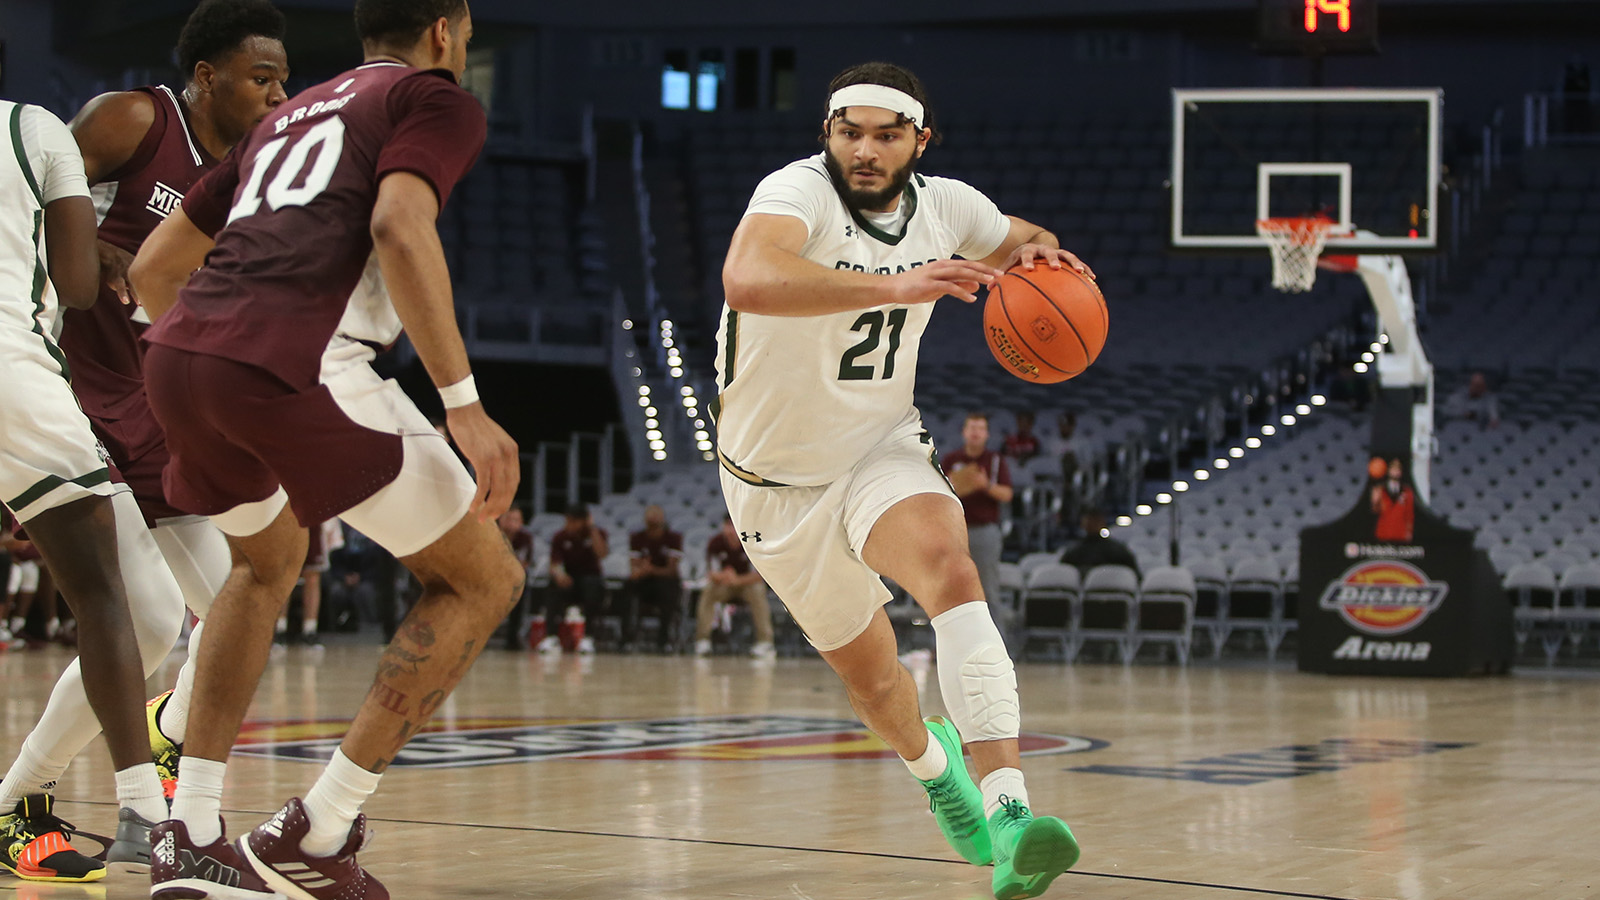 Colorado State Rams guard David Roddy drives to the basket during the Basketball Hall of Fame classic game between Mississippi State and Colorado State on Dec. 11, 2021 at Dickies Arena in Fort Worth, Texas.